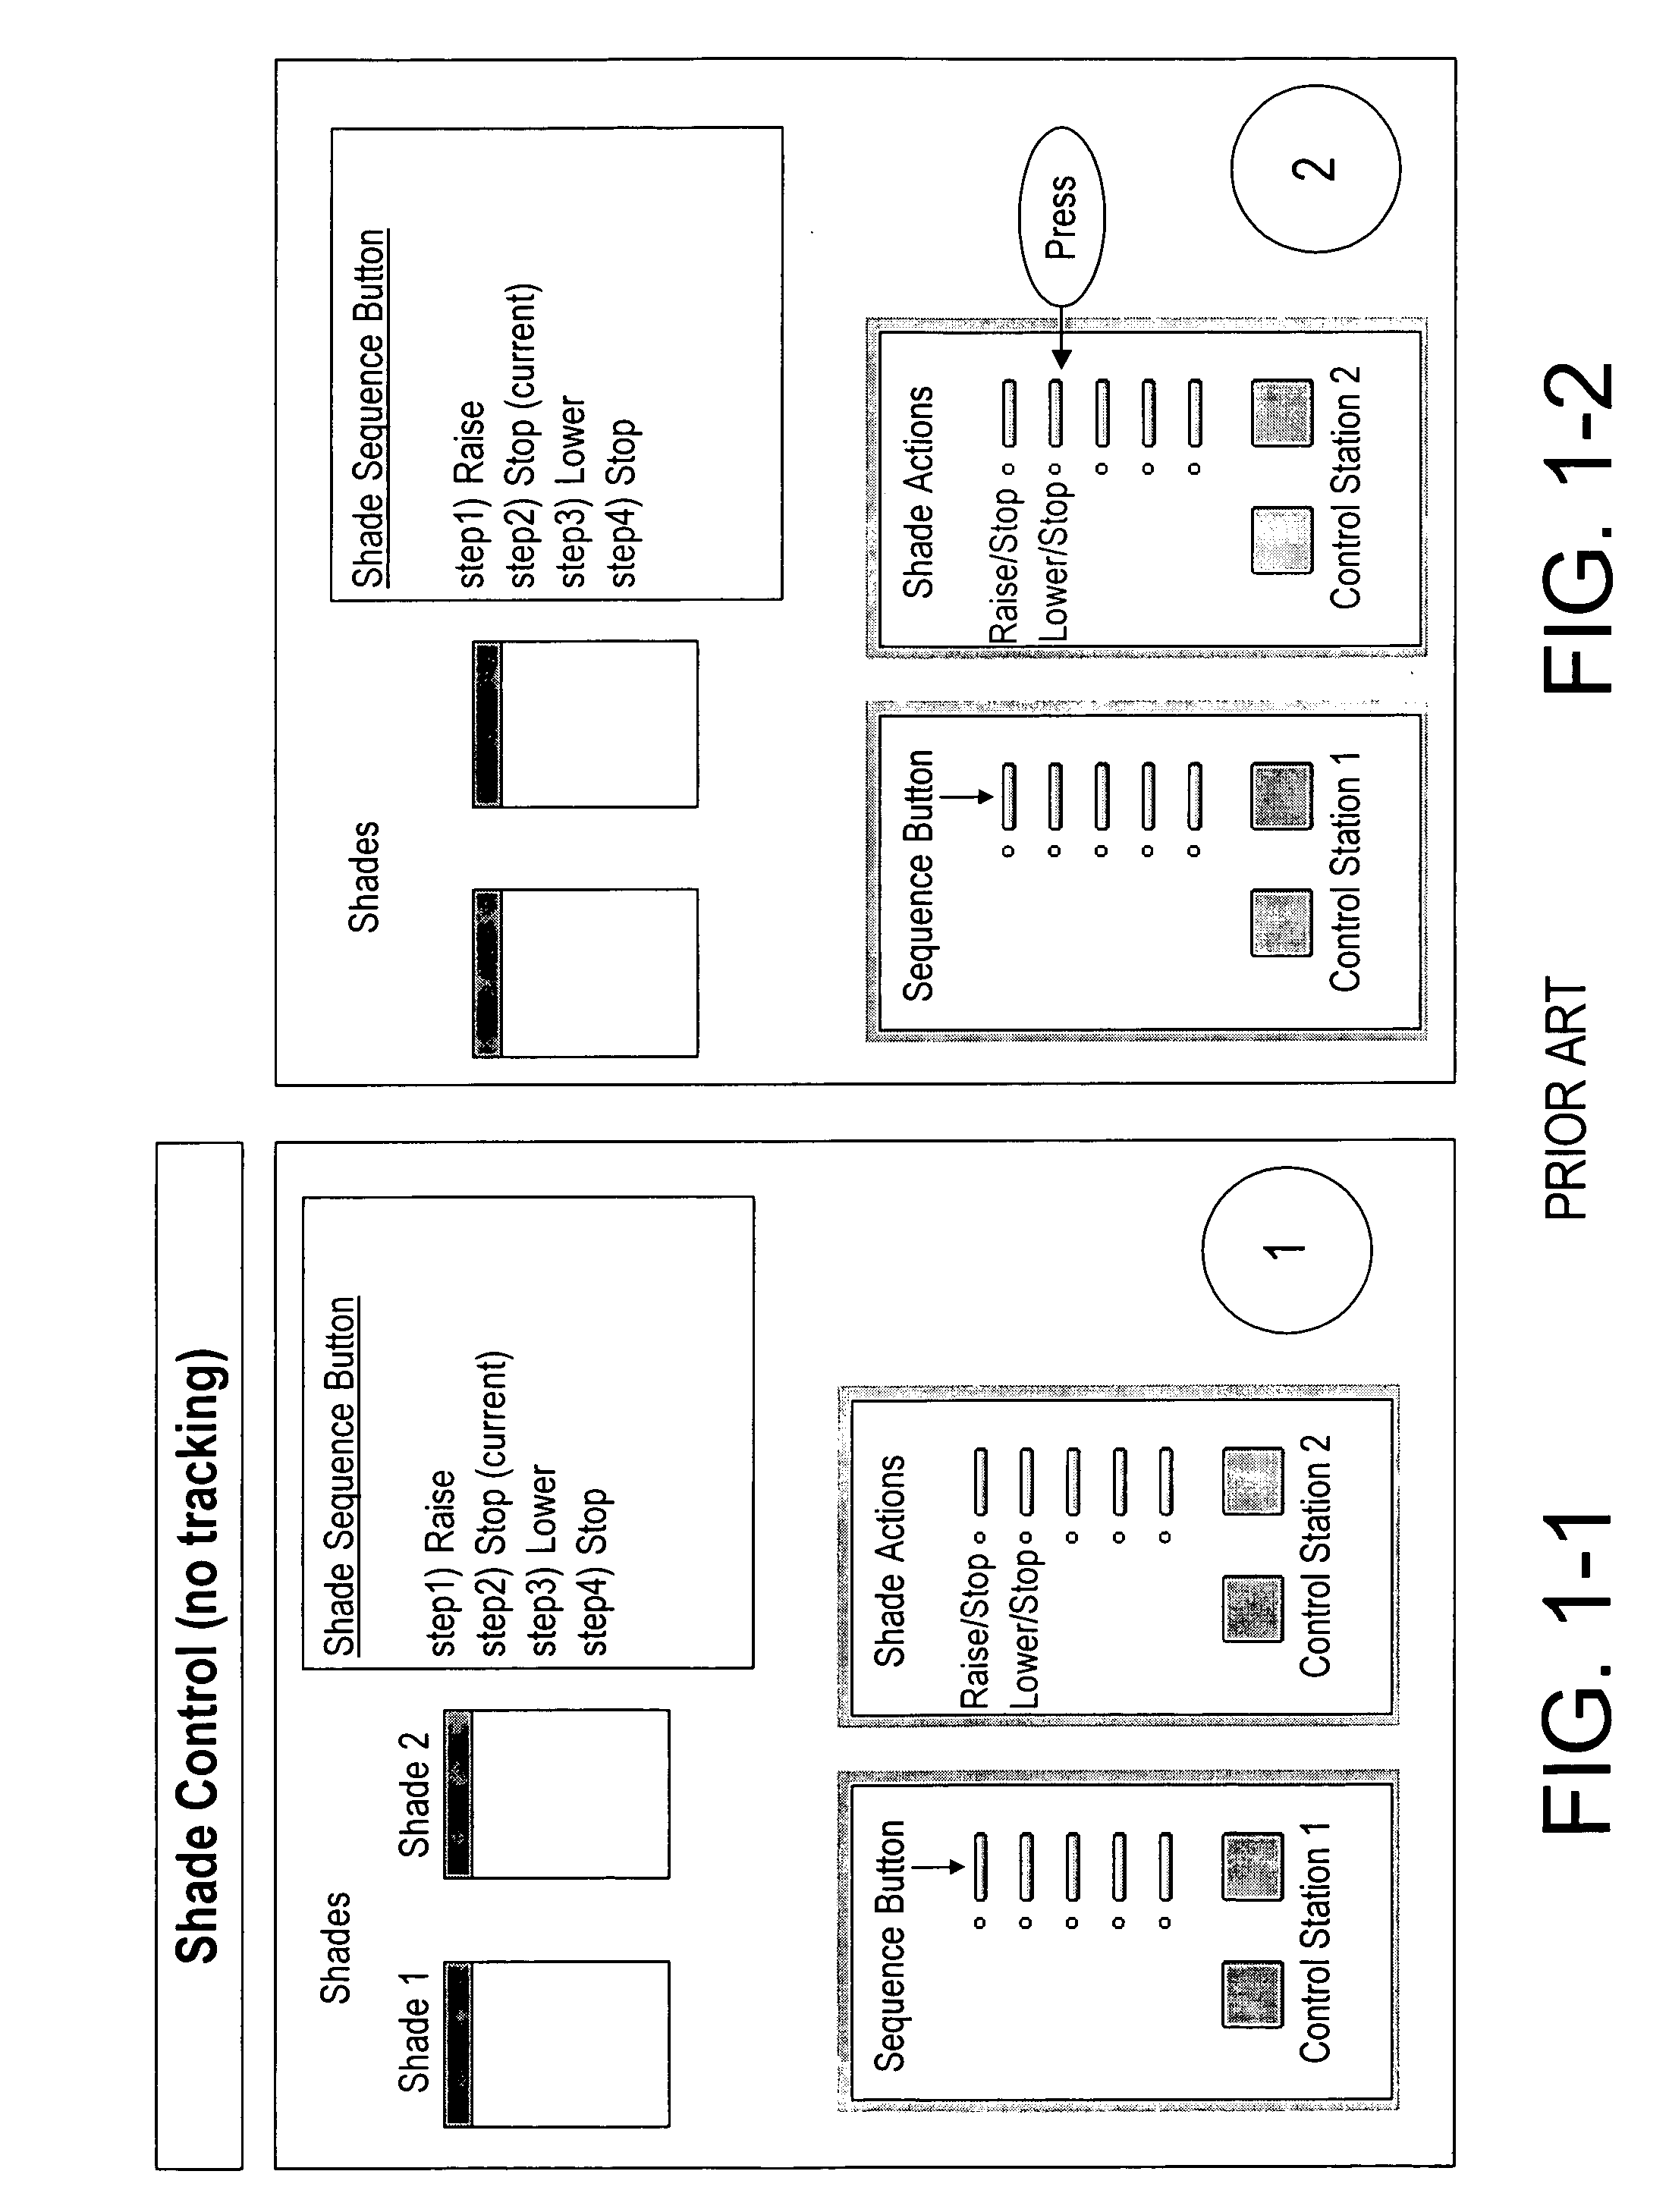 Method and apparatus for tracking sequences of an electrical device controllable from multiple locations